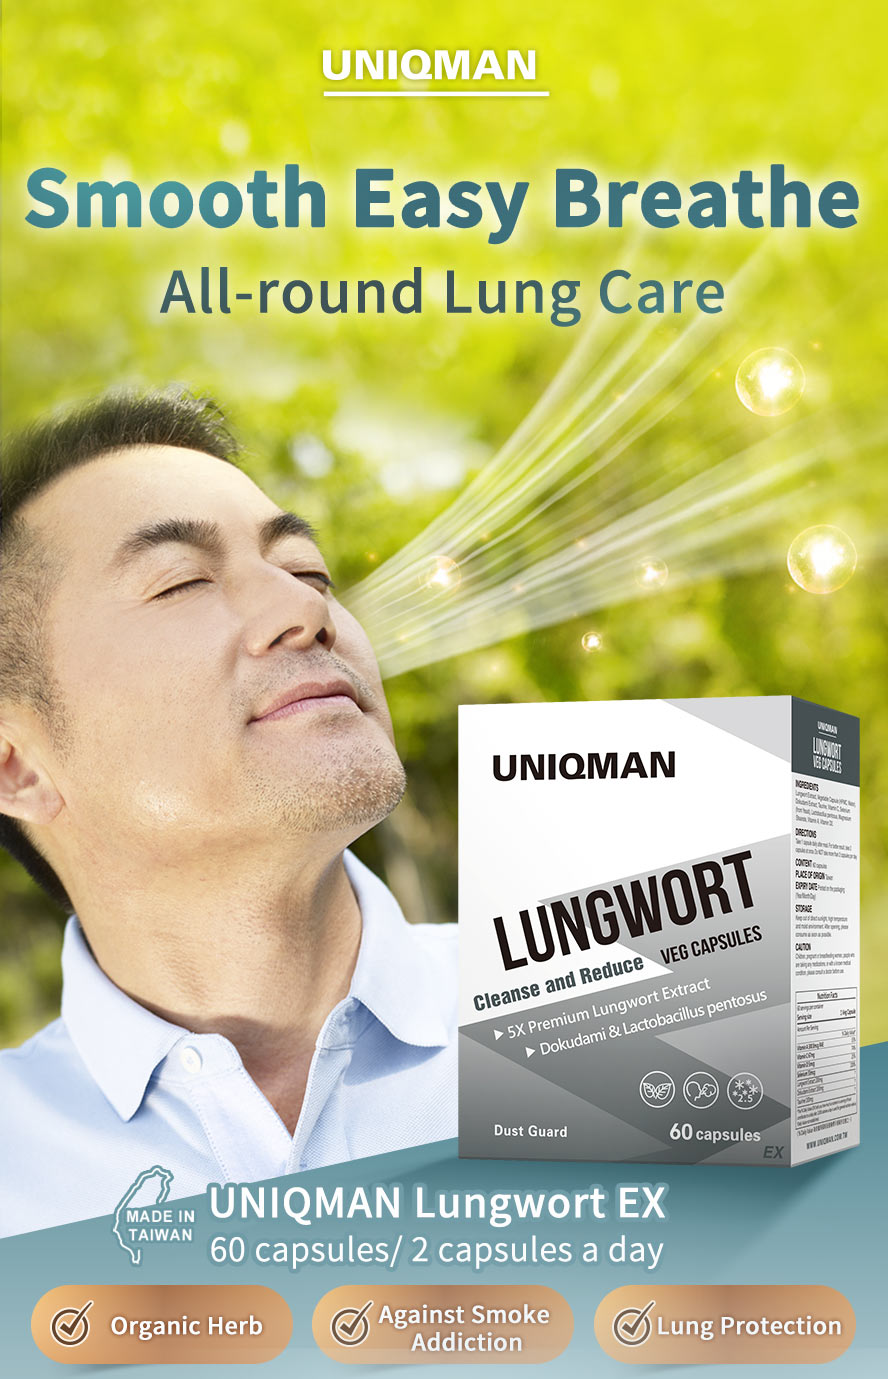 UNIQMAN Lungwort EX supports lung & respitatory health care to promote smooth easy care